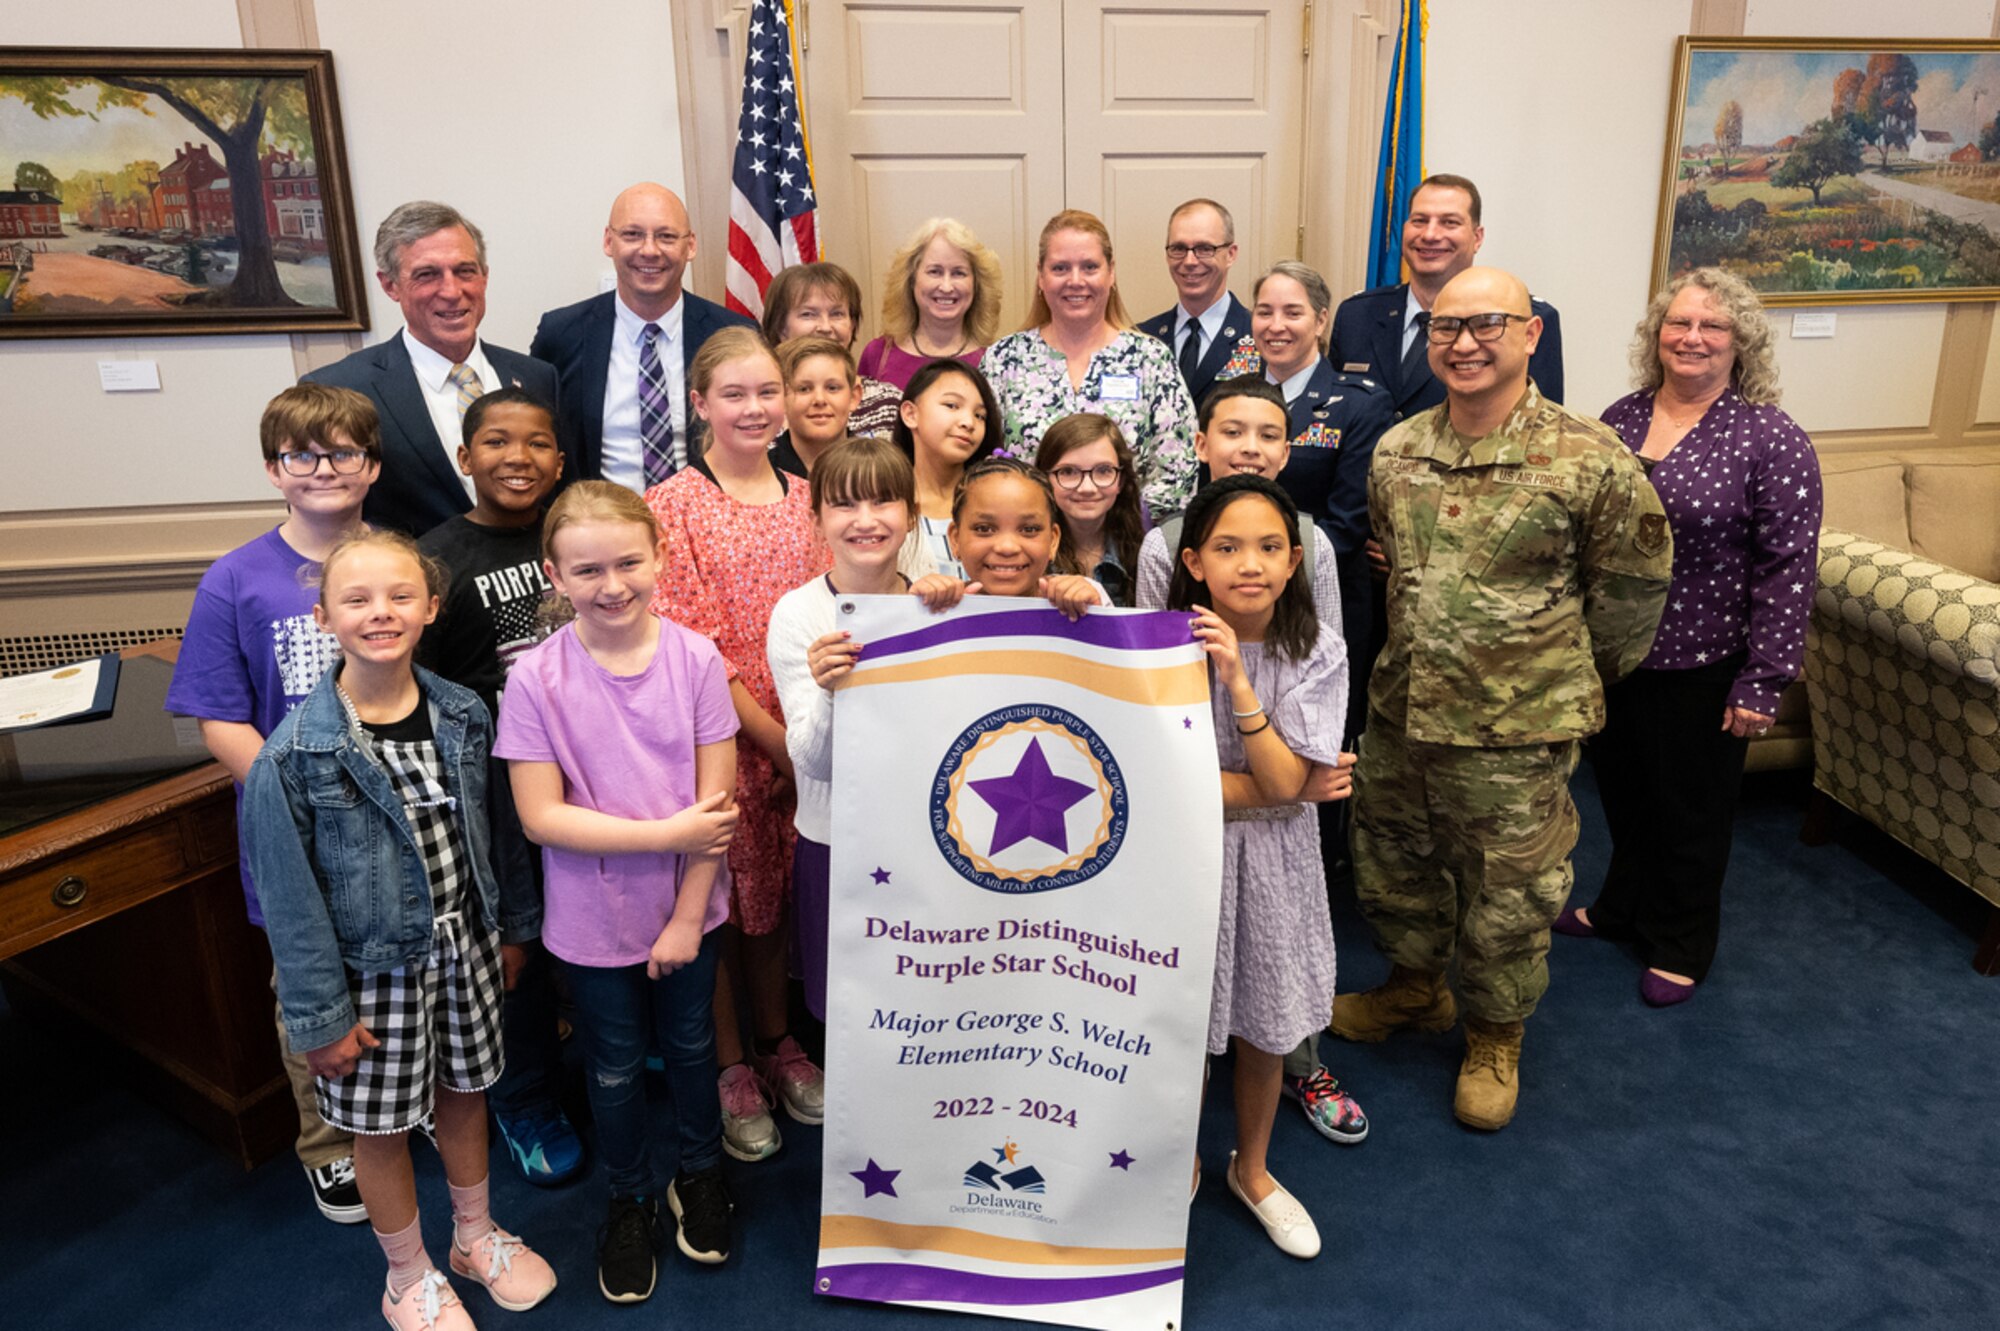 Team Dover leadership along with students and faculty from Major George S. Welch Elementary School stand with Delaware Gov. John Carney after signing a document proclaiming April as the Month of the Military Child in Dover, Delaware, April 12, 2022. The Month of the Military Child was established in 1986, recognizing the contributions and personal sacrifices children make to the armed forces. (U.S. Air Force photo by Mauricio Campino)